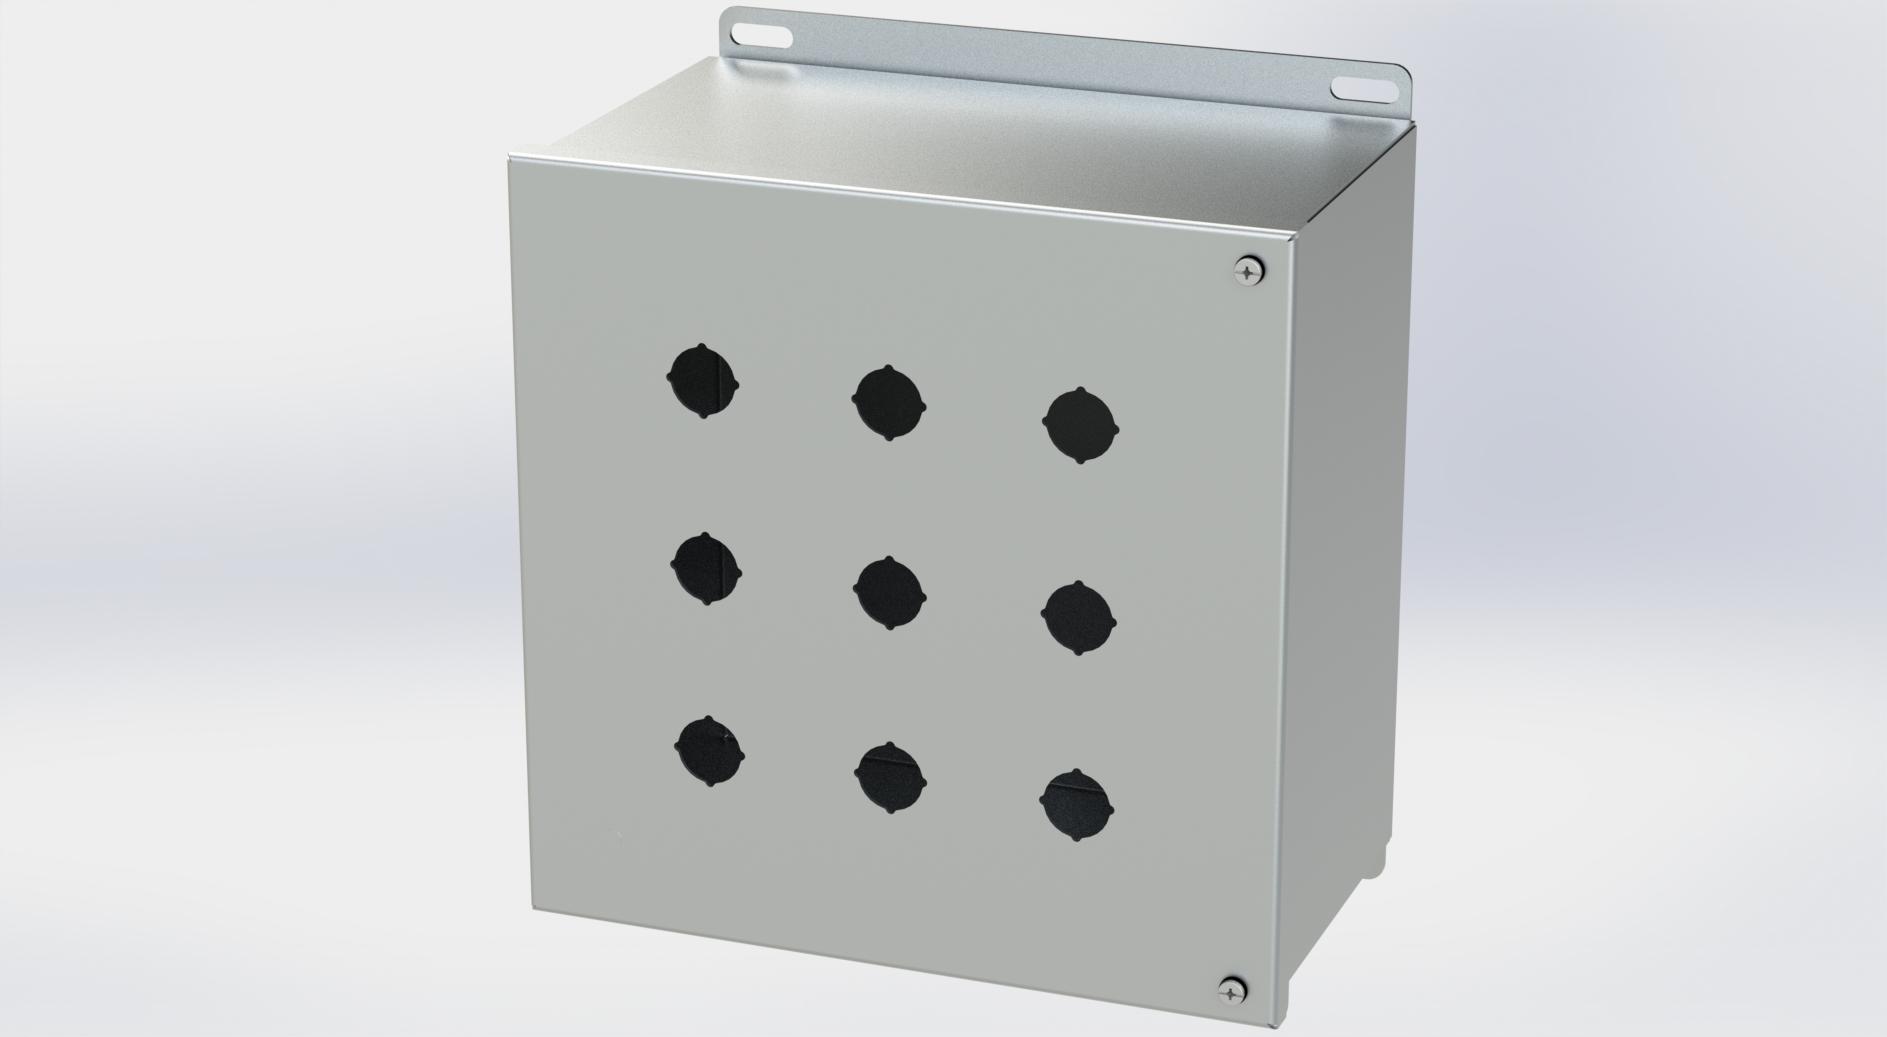 Saginaw Control SCE-9PBHSS6I S.S. PB Enclosure, Height:10.13", Width:10.00", Depth:6.00", #4 brushed finish on all exterior surfaces. Optional sub-panels are powder coated white.